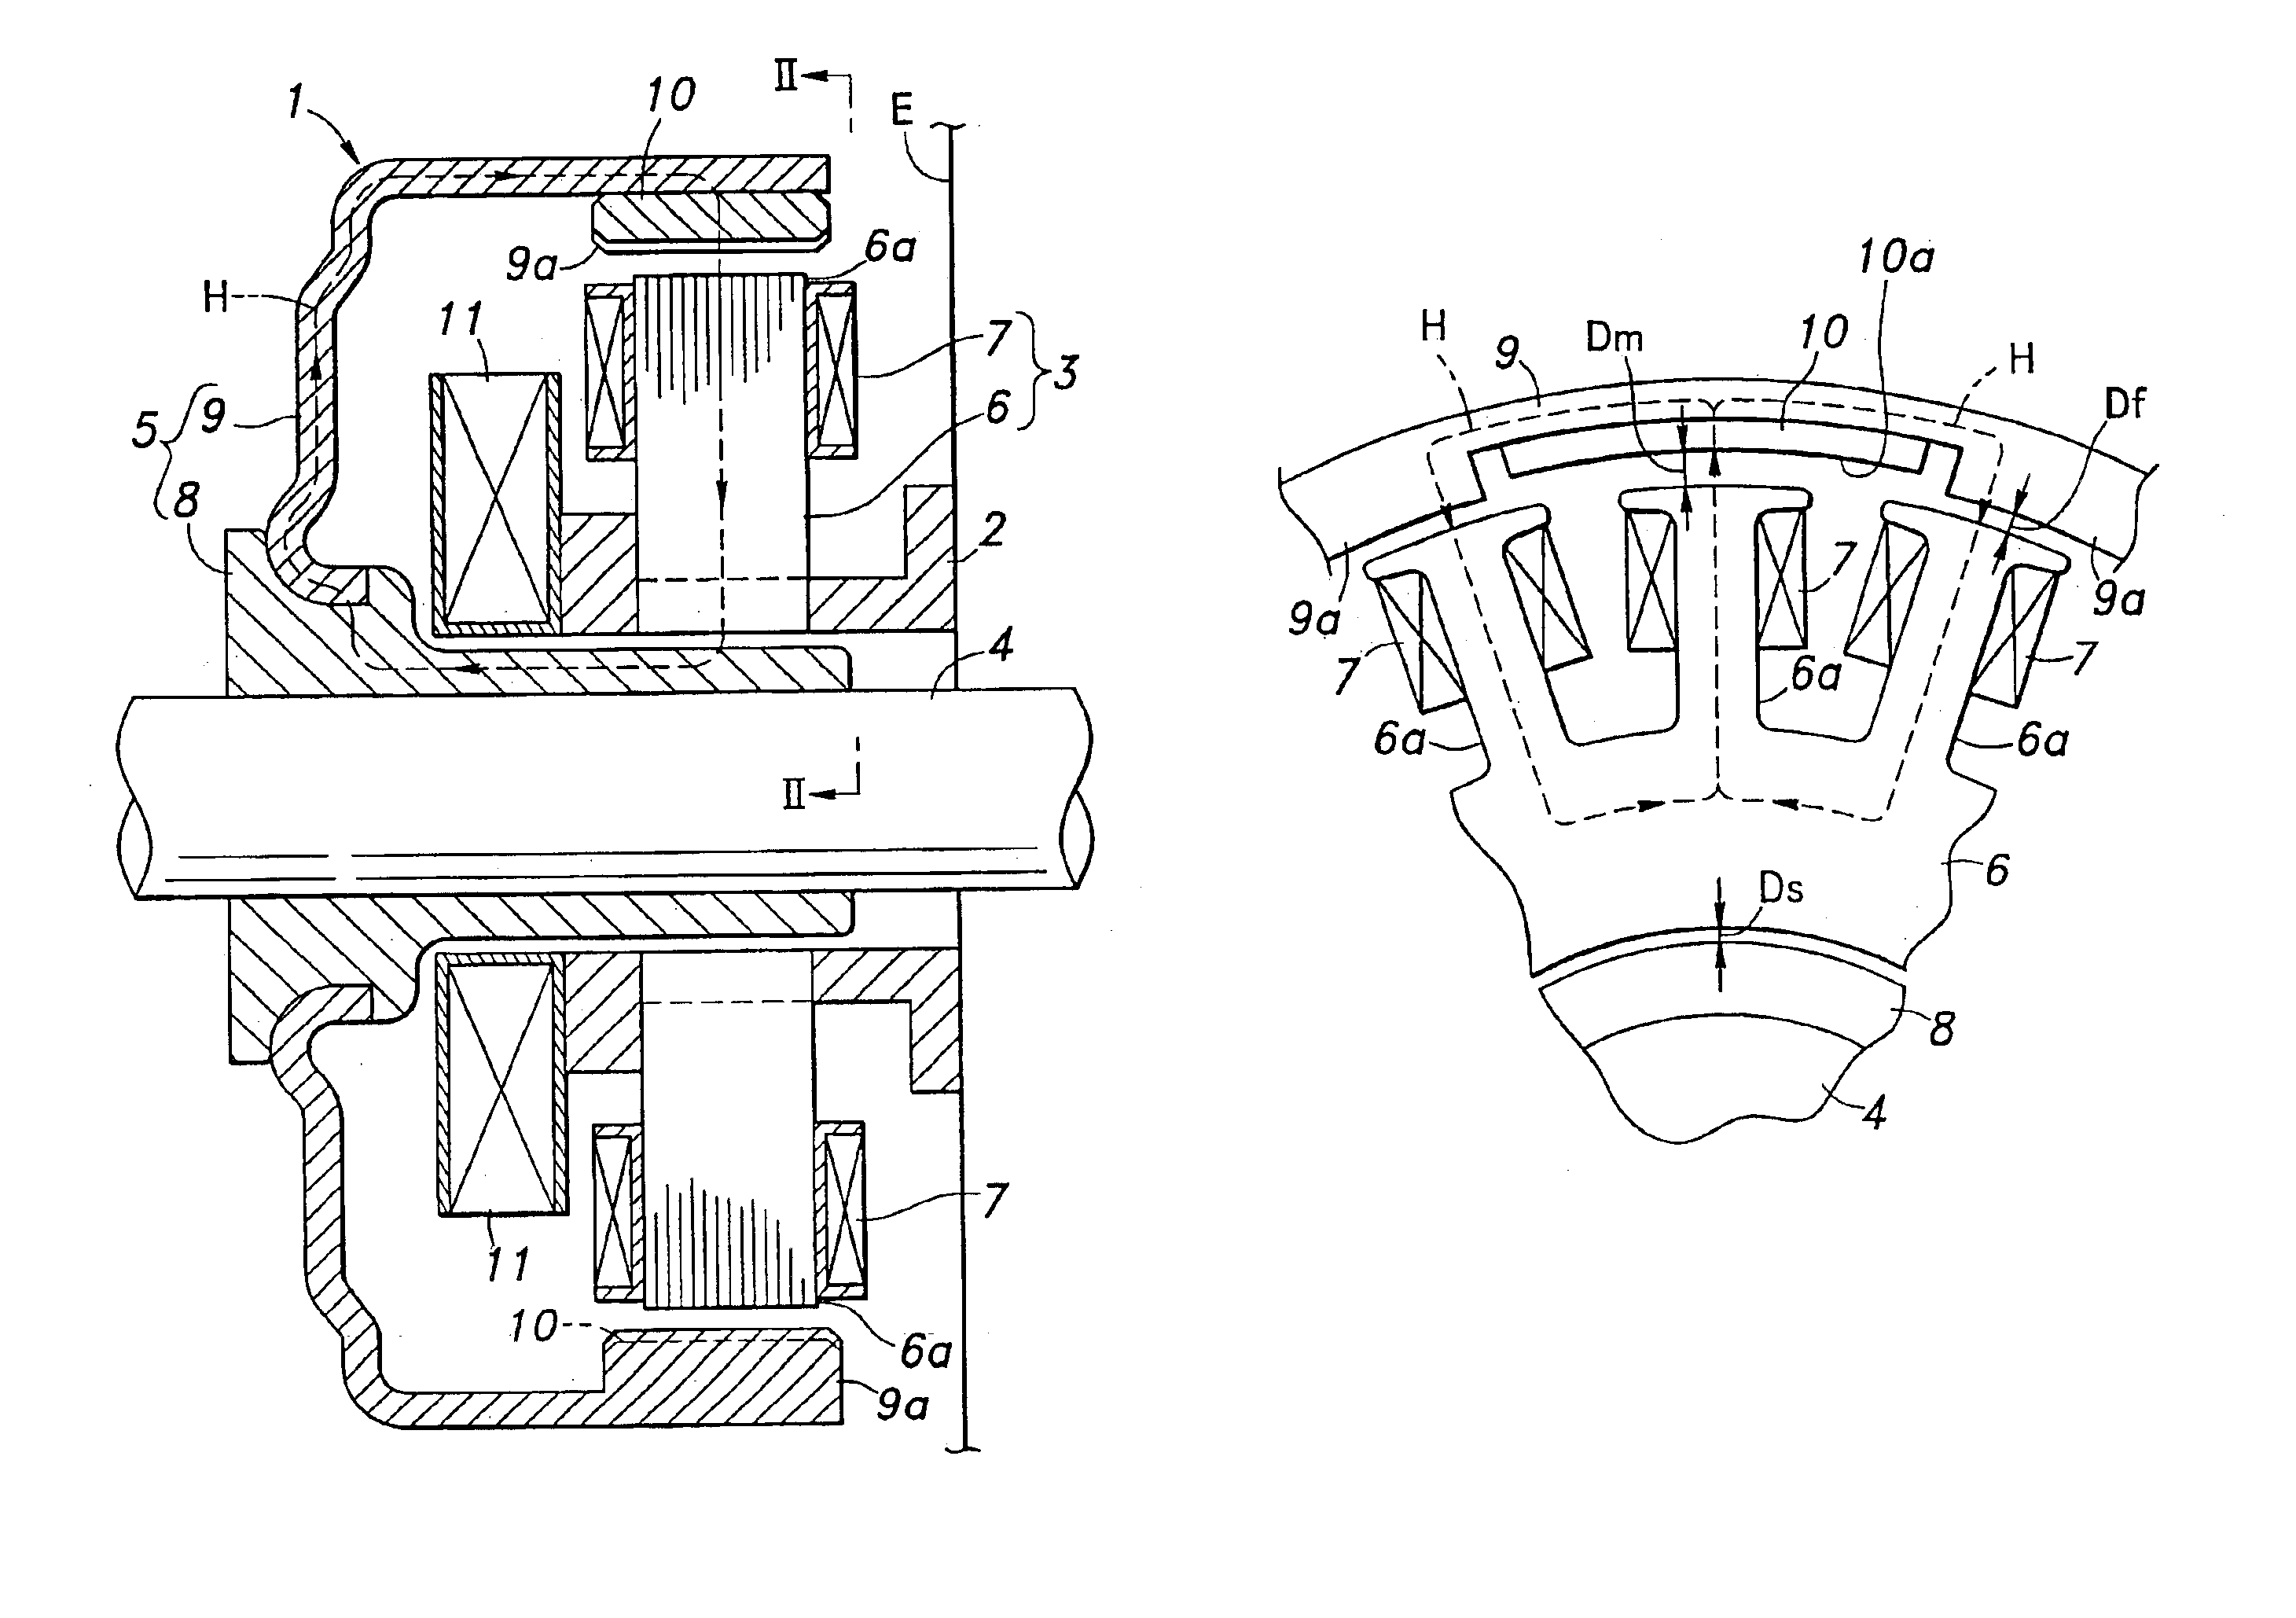 Electric rotating machine provided with a field control coil